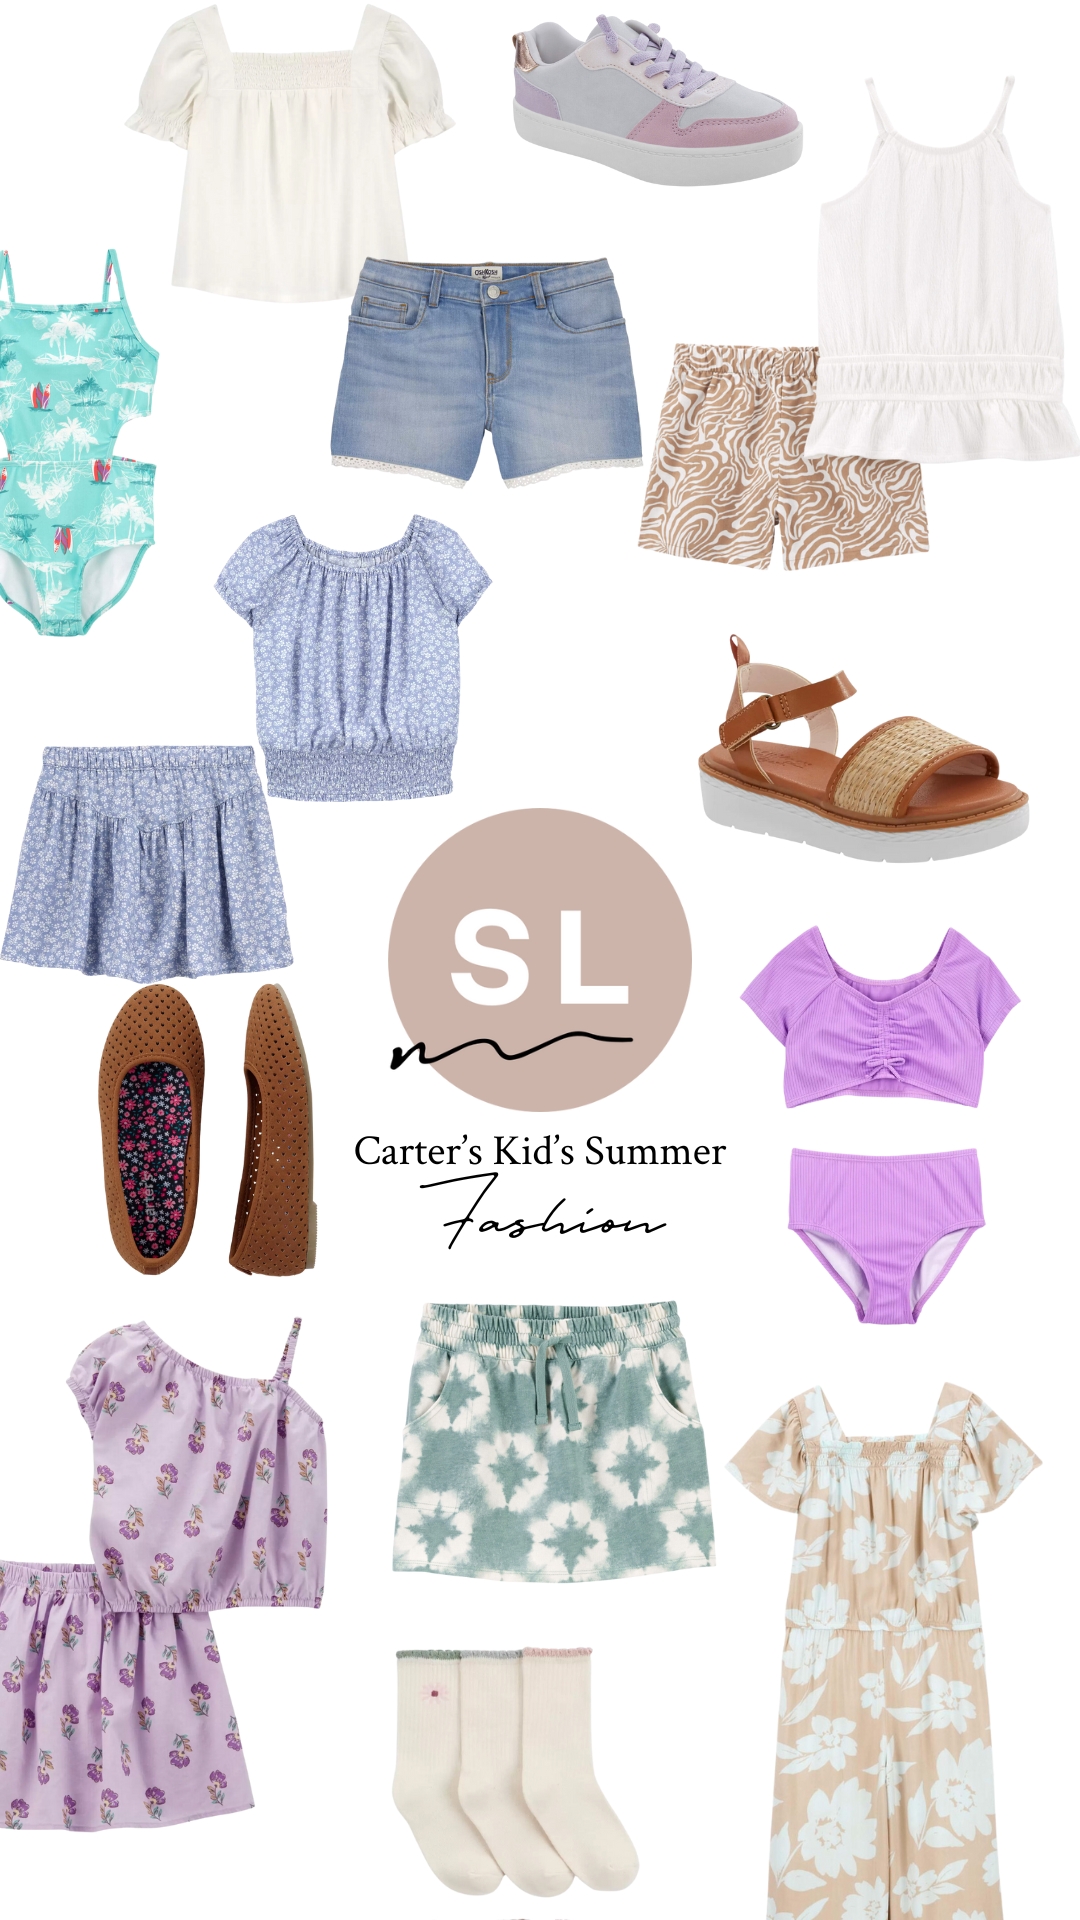 collage of Carter's Kid's summer fashion